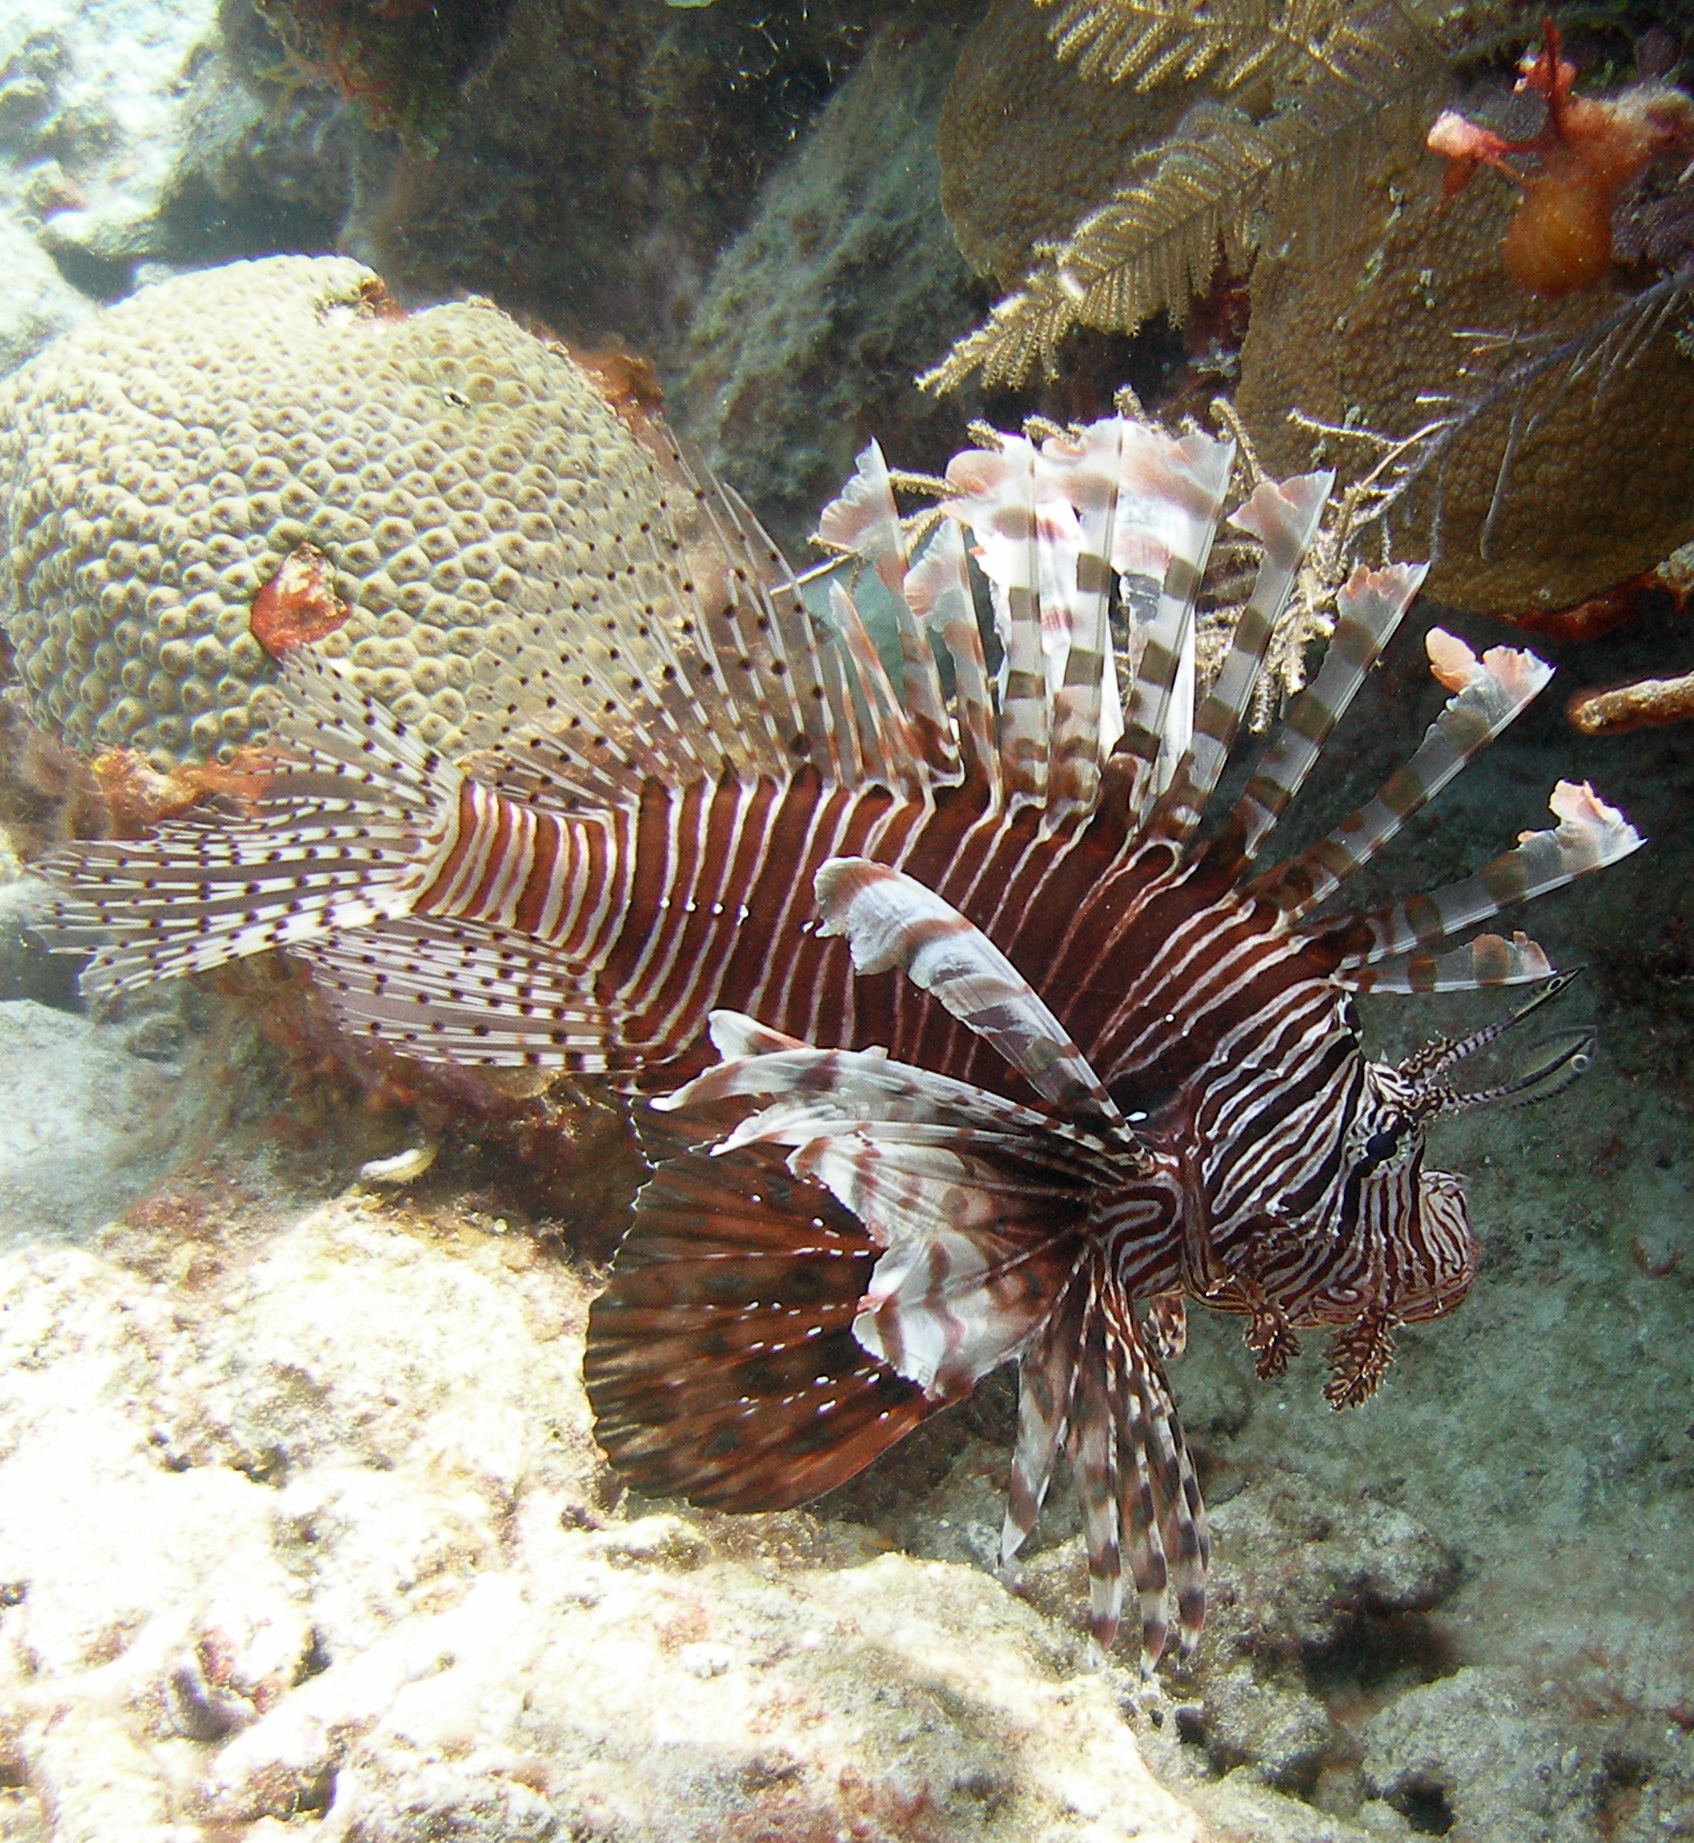 Local intervention is critical in culling lionfish.